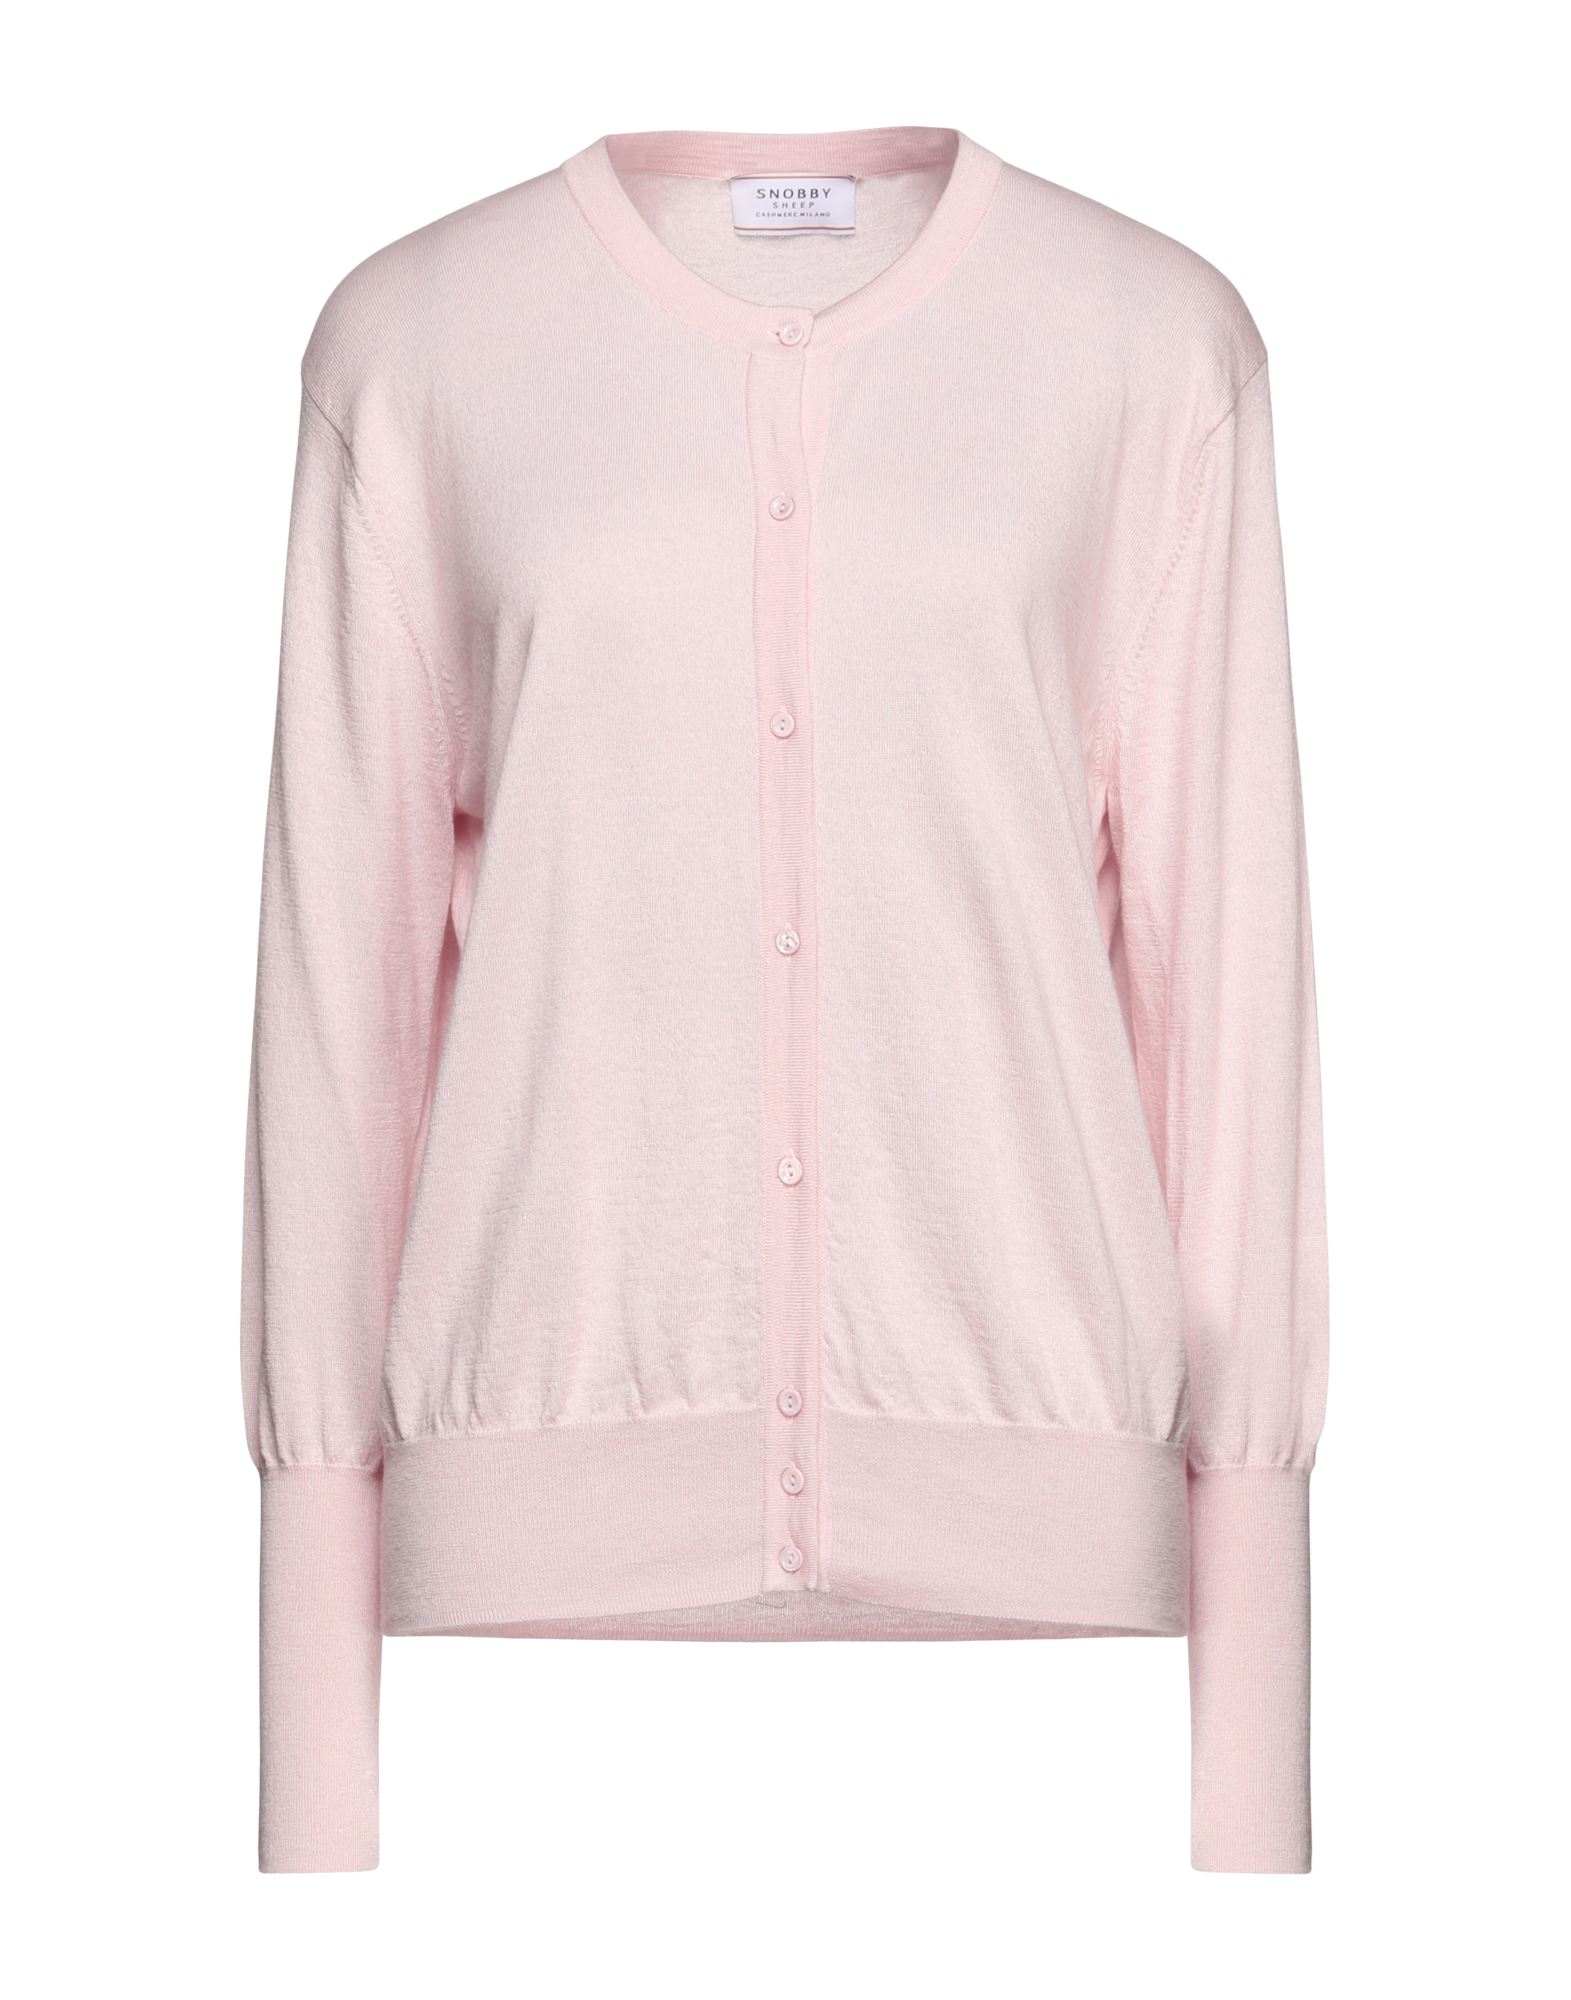 Snobby Sheep Cardigans In Light Pink